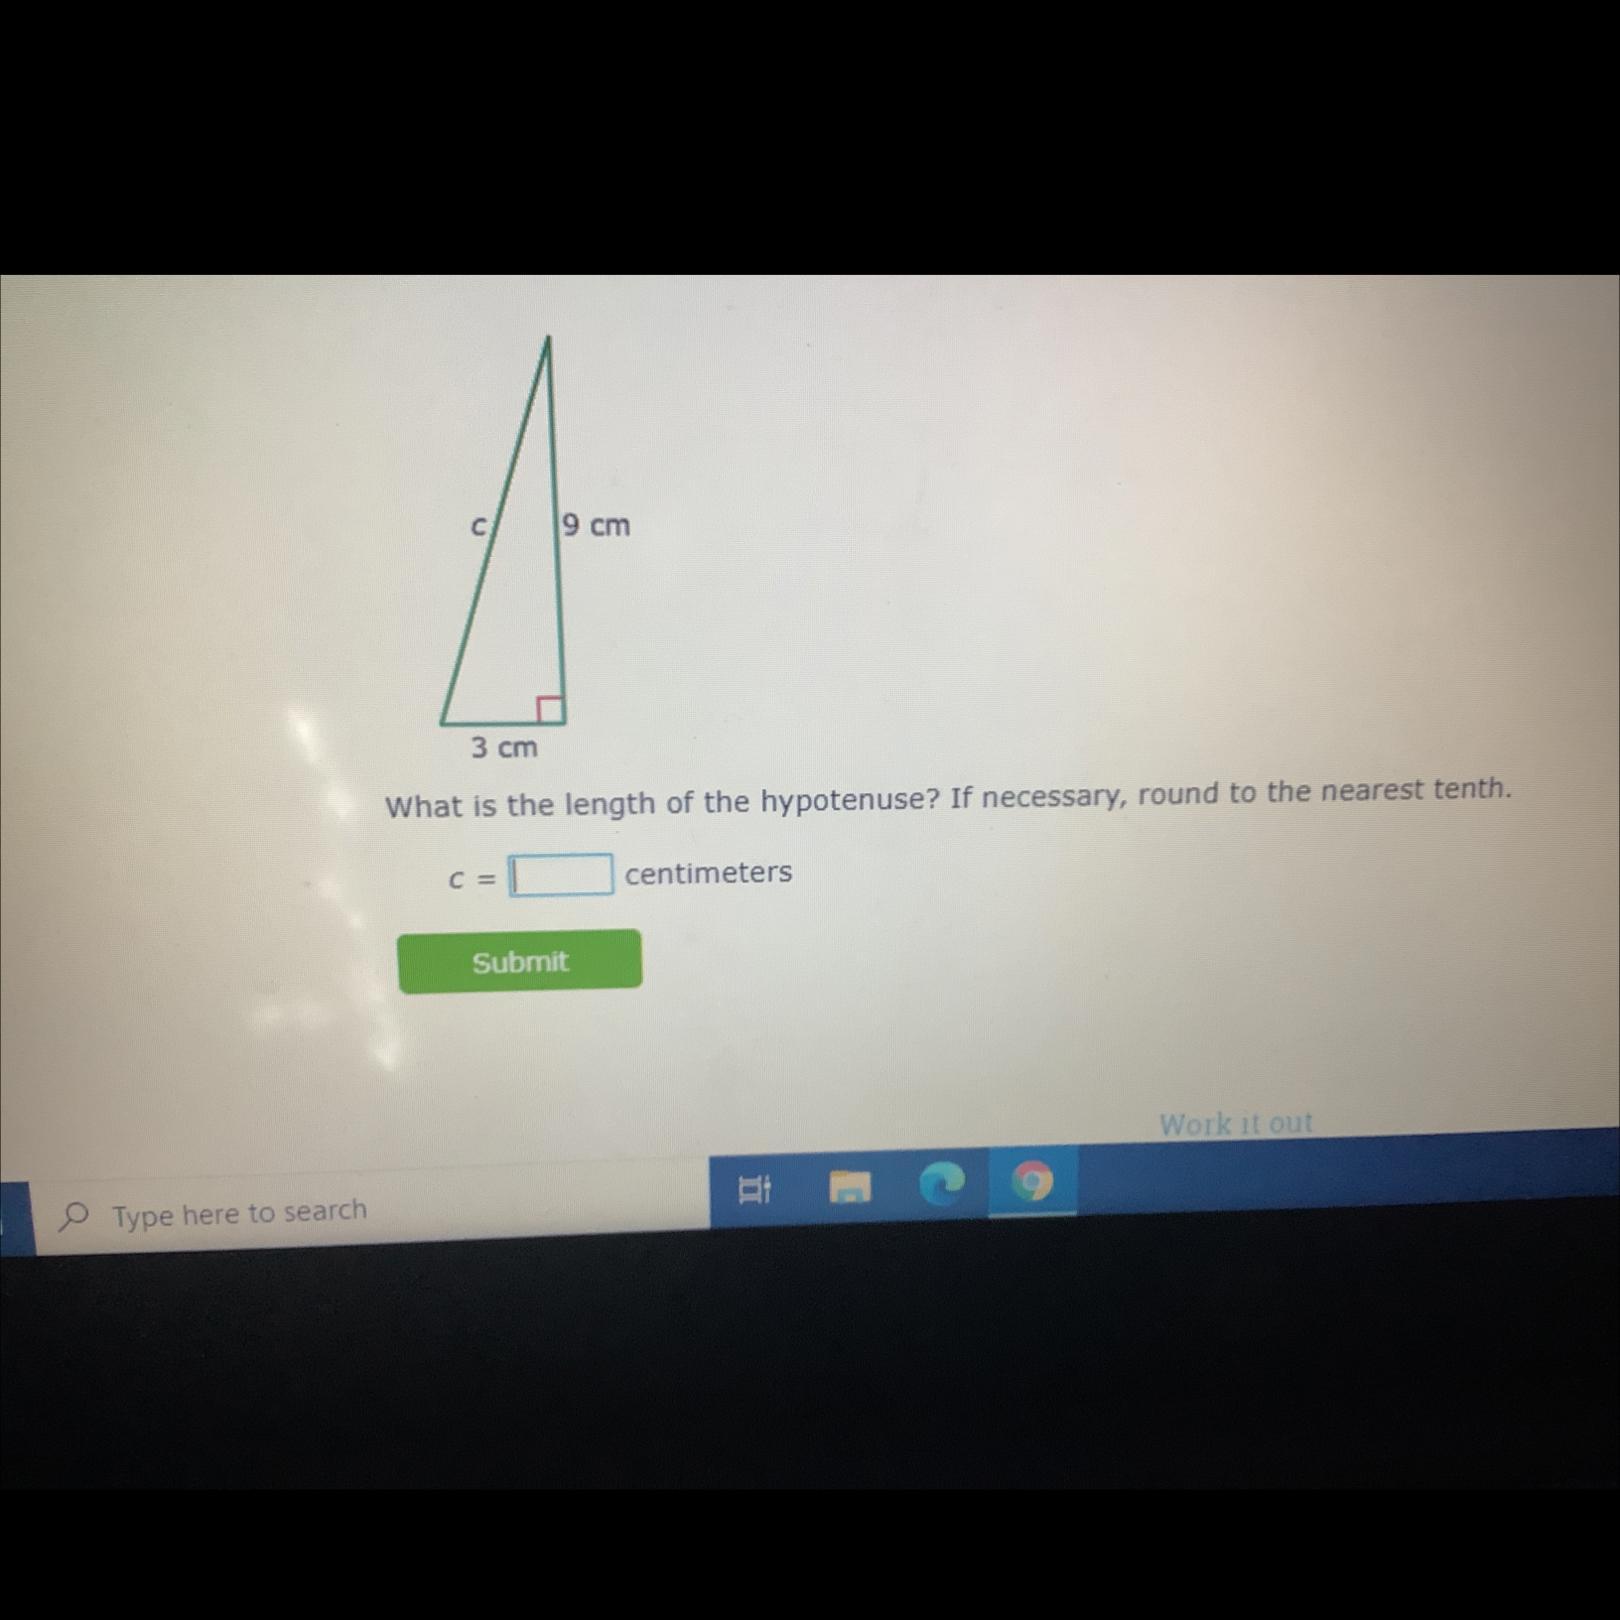 What Is The Length Of The Hypotensis?If Necessary Round To The Nearest 10th